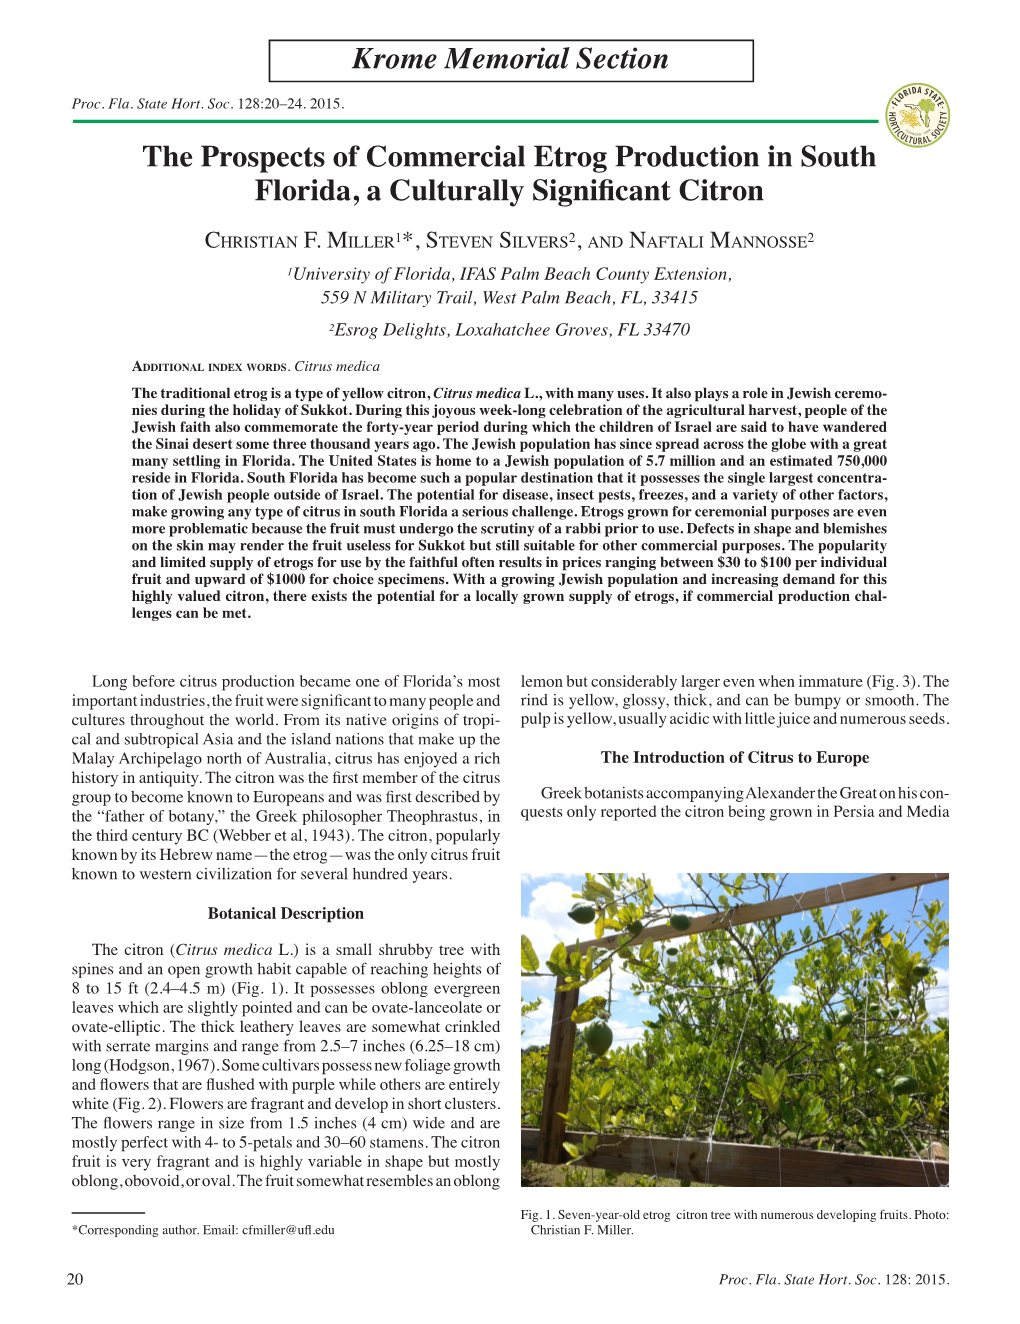 The Prospects of Commercial Etrog Production in South Florida, a Culturally Significant Citron